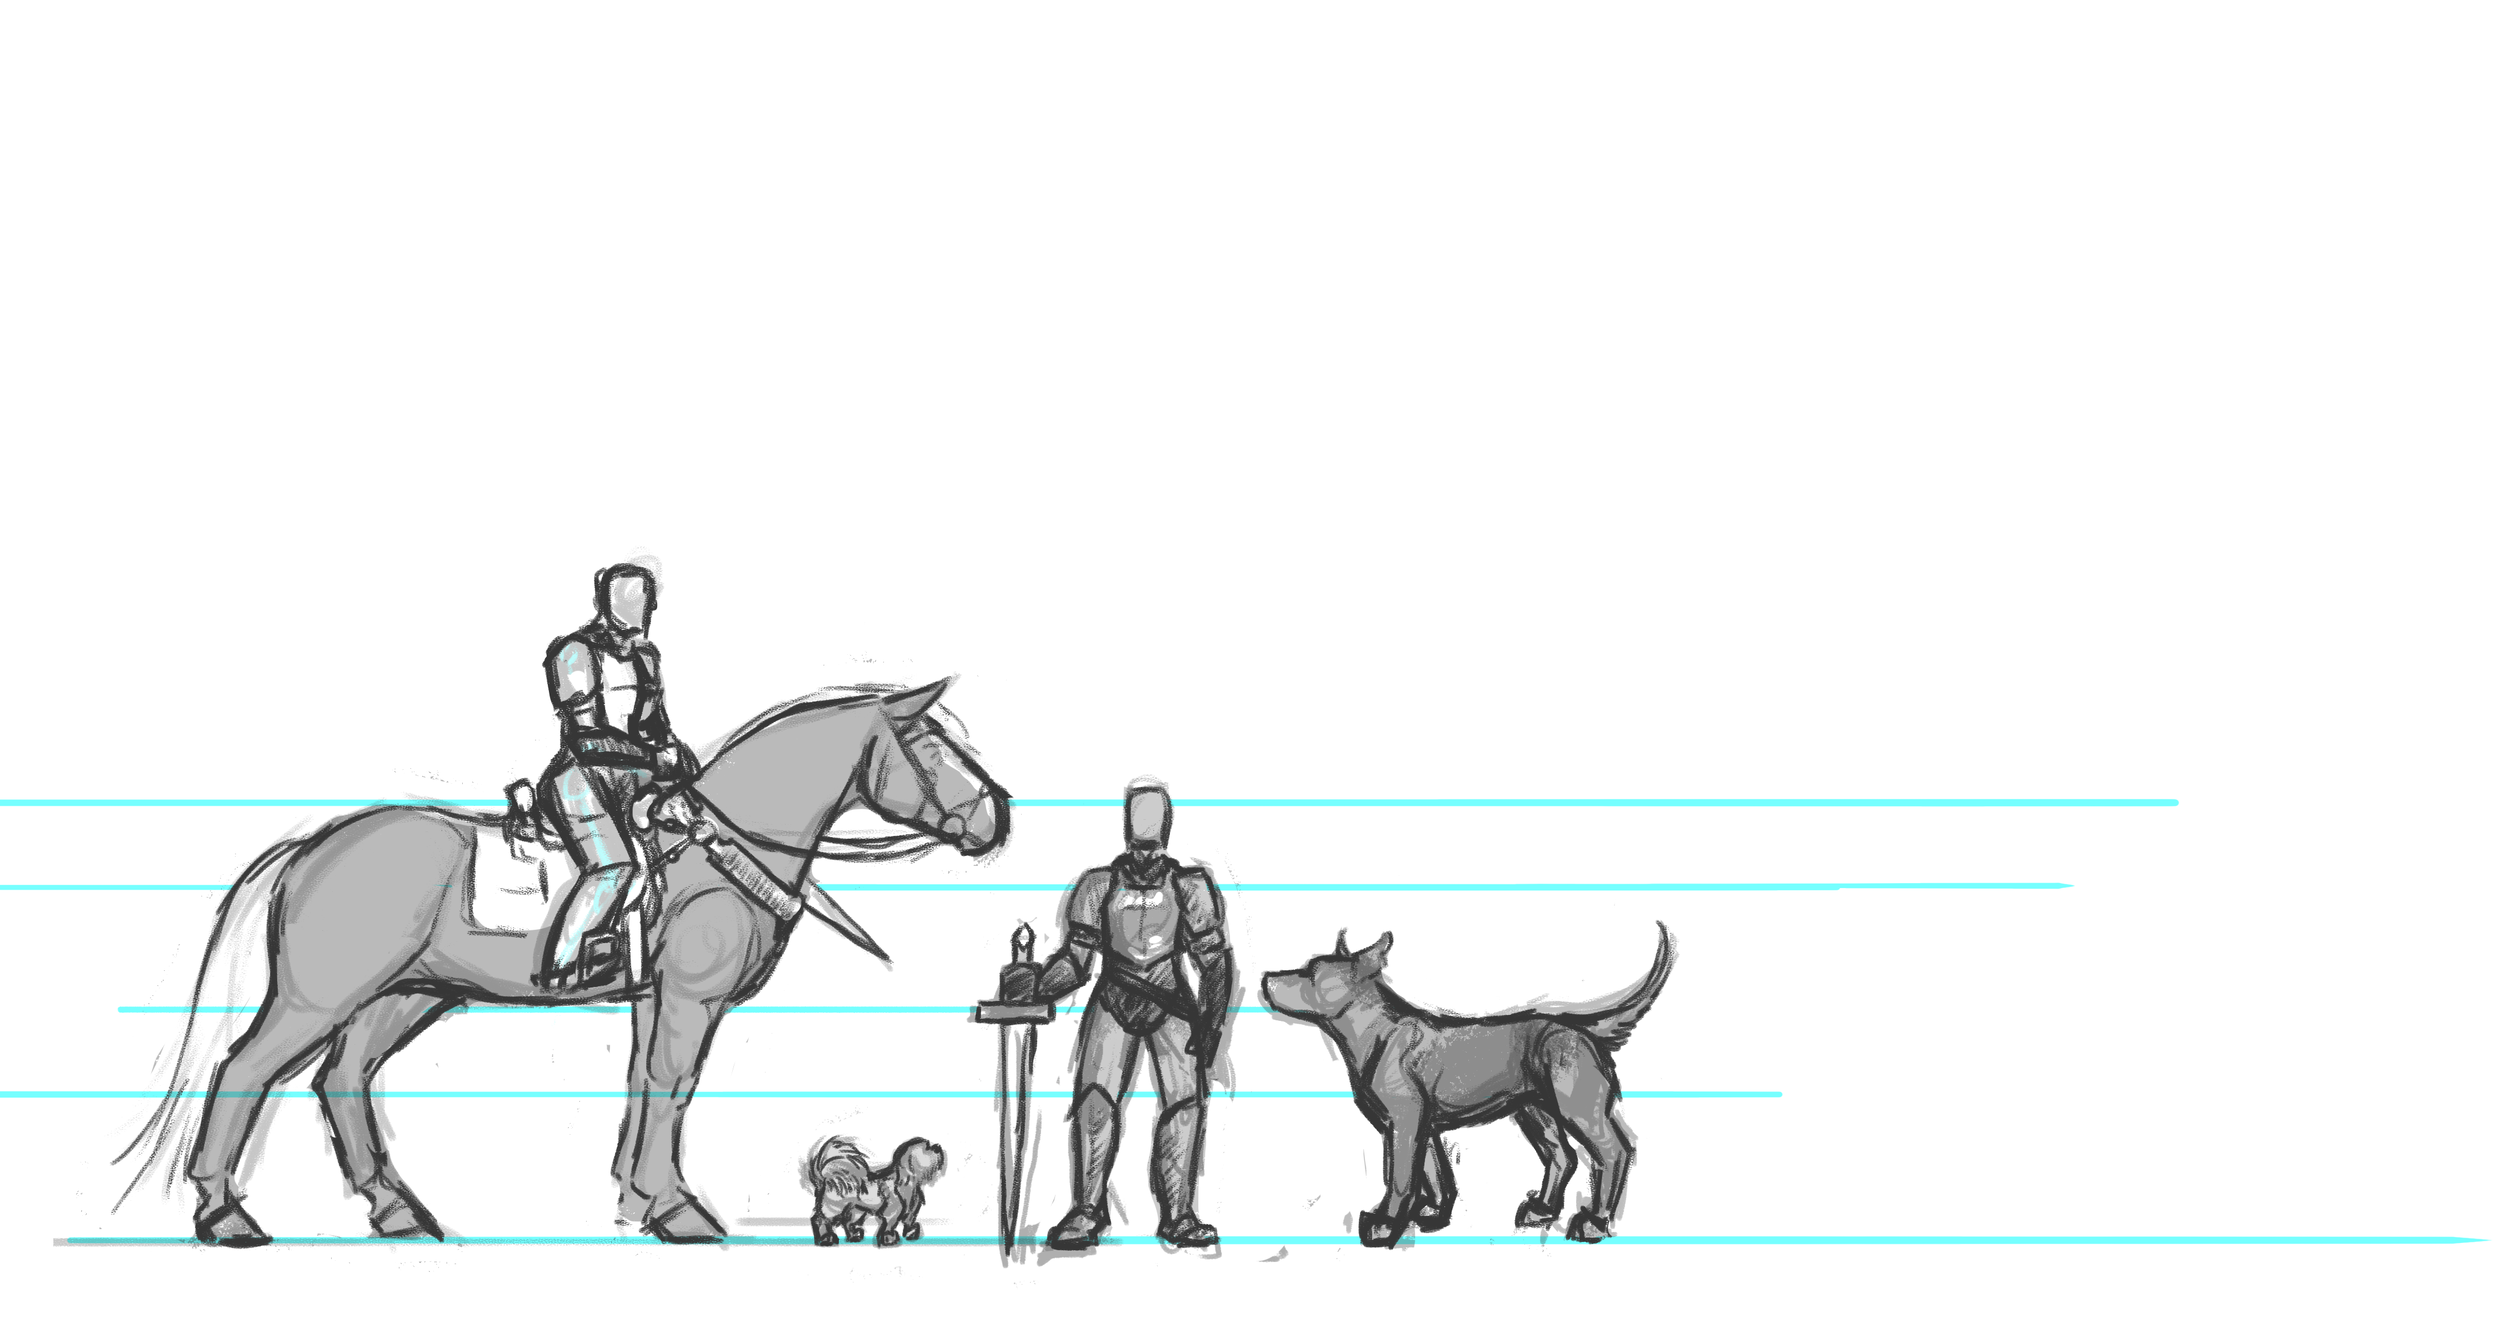 thesis_heightchartwithtinydog.png